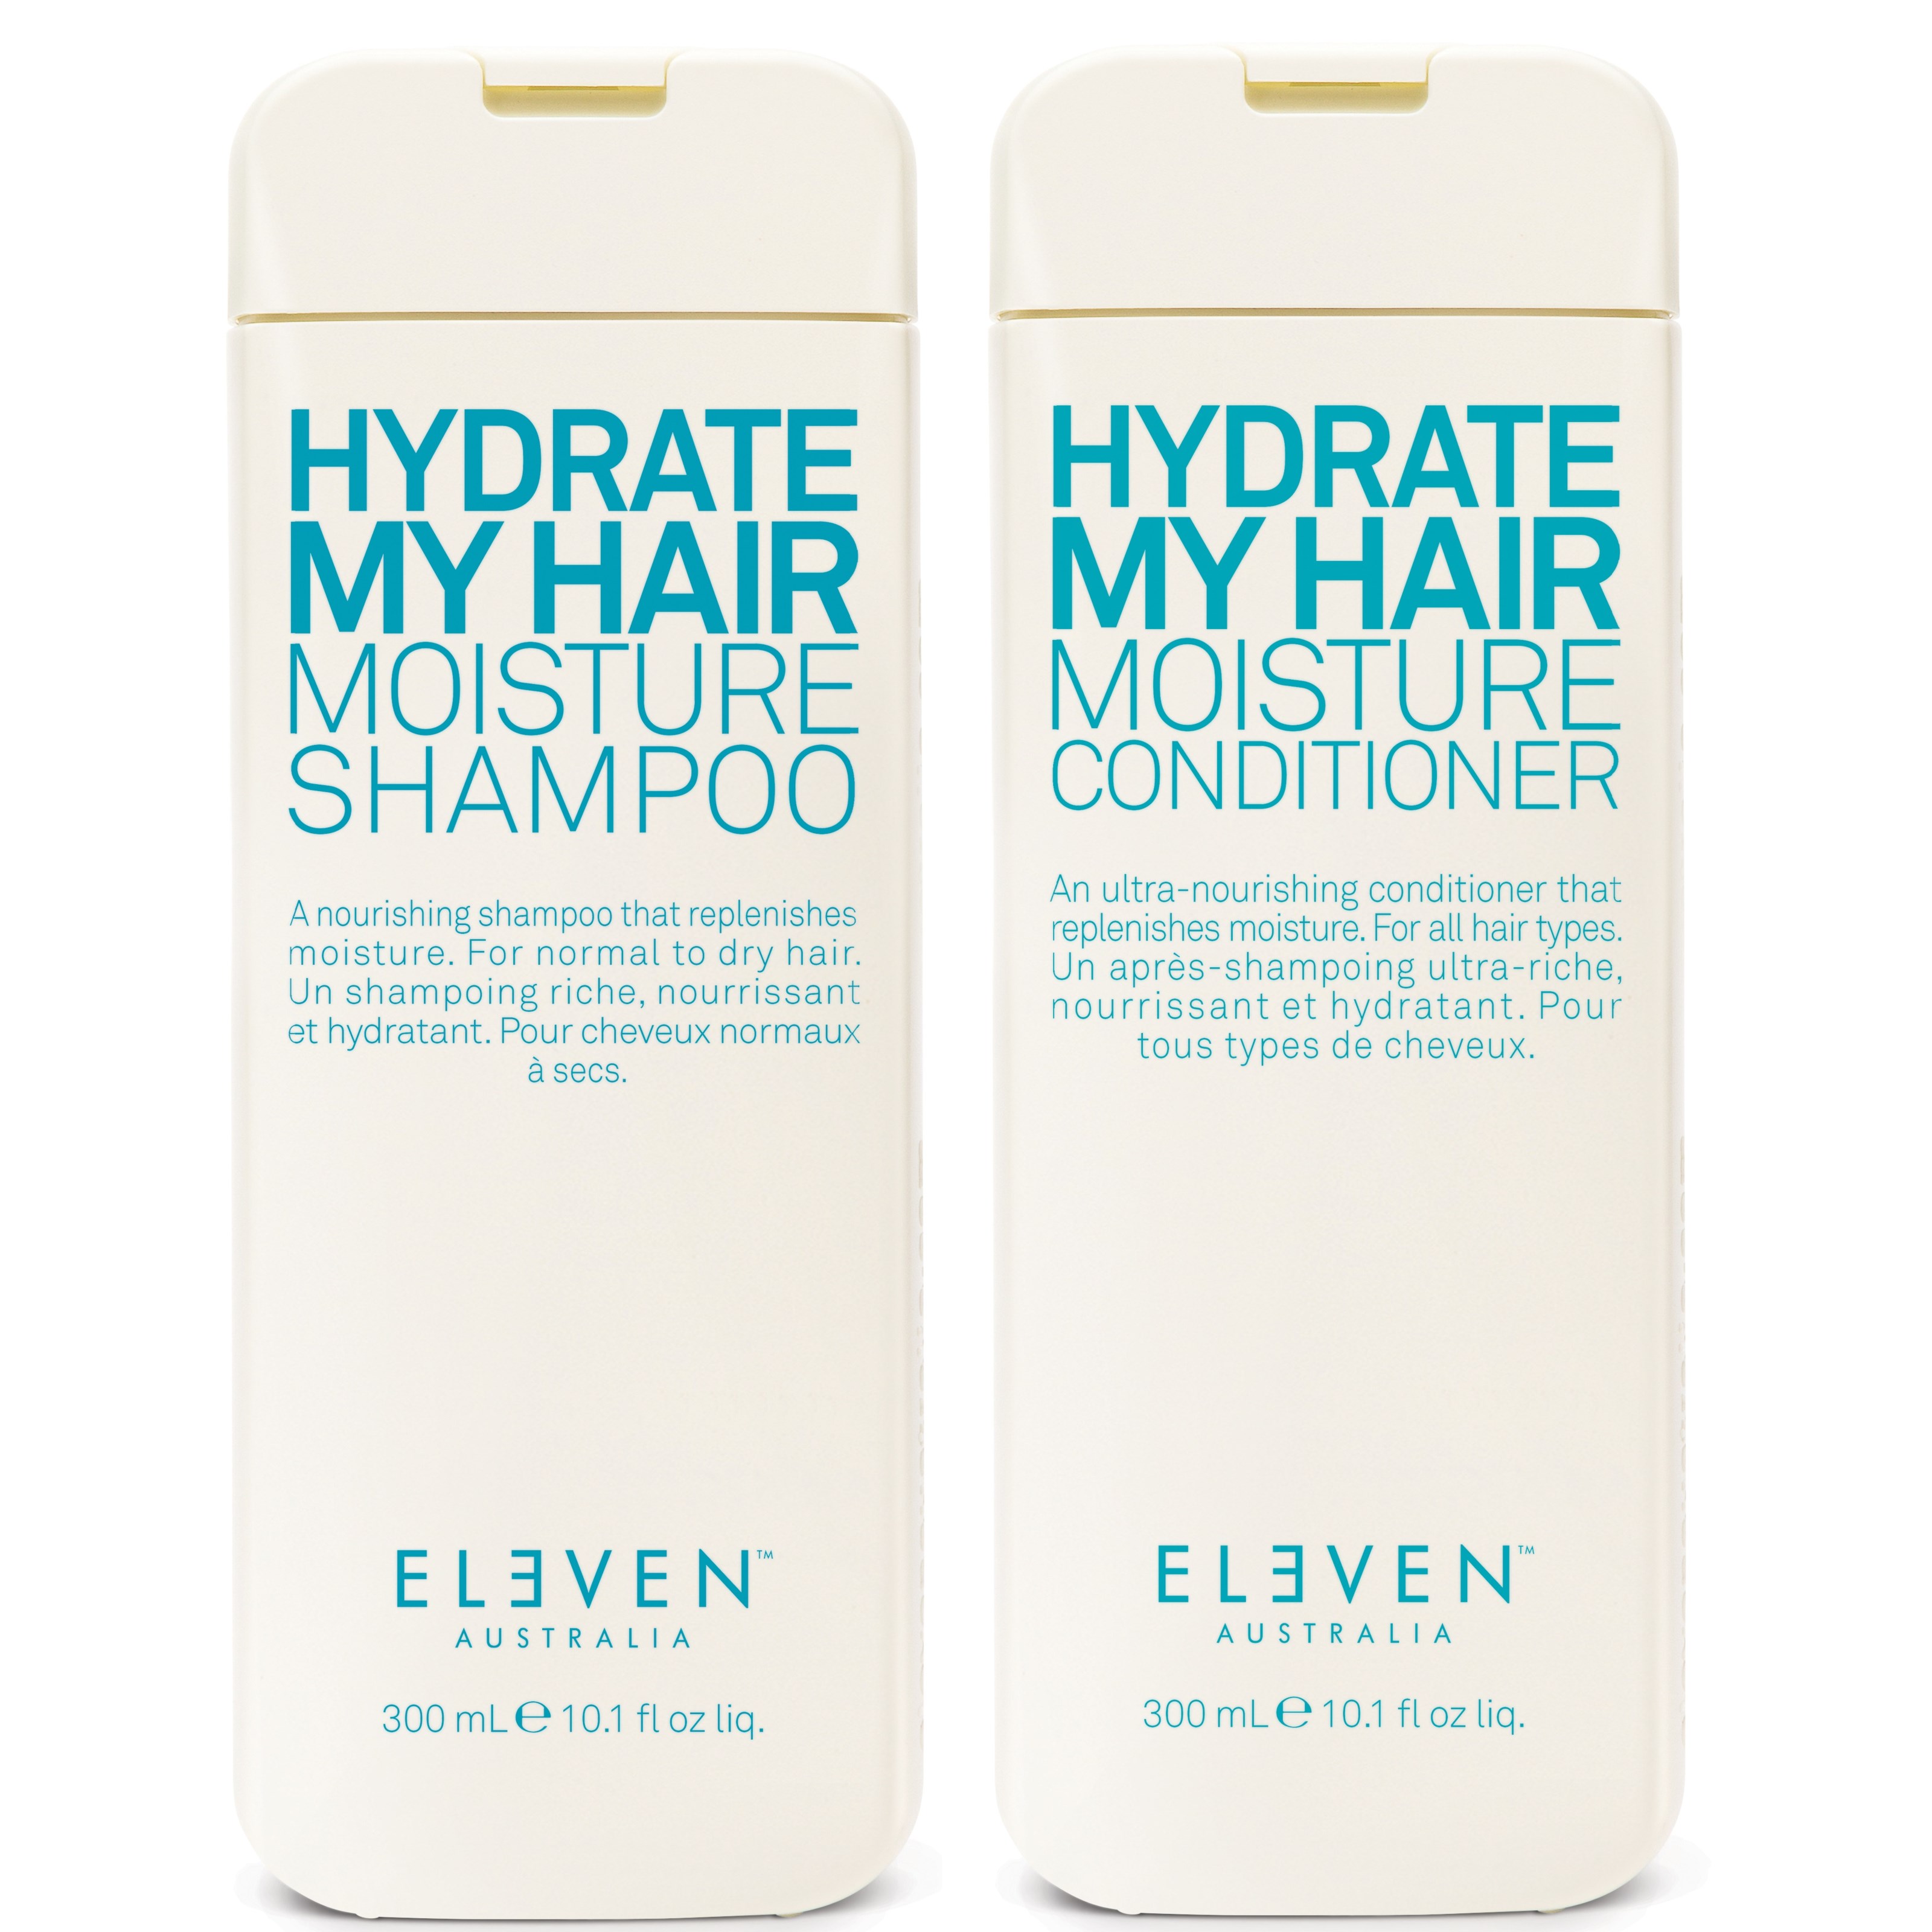 Eleven Australia HYDRATE MY HAIR Package